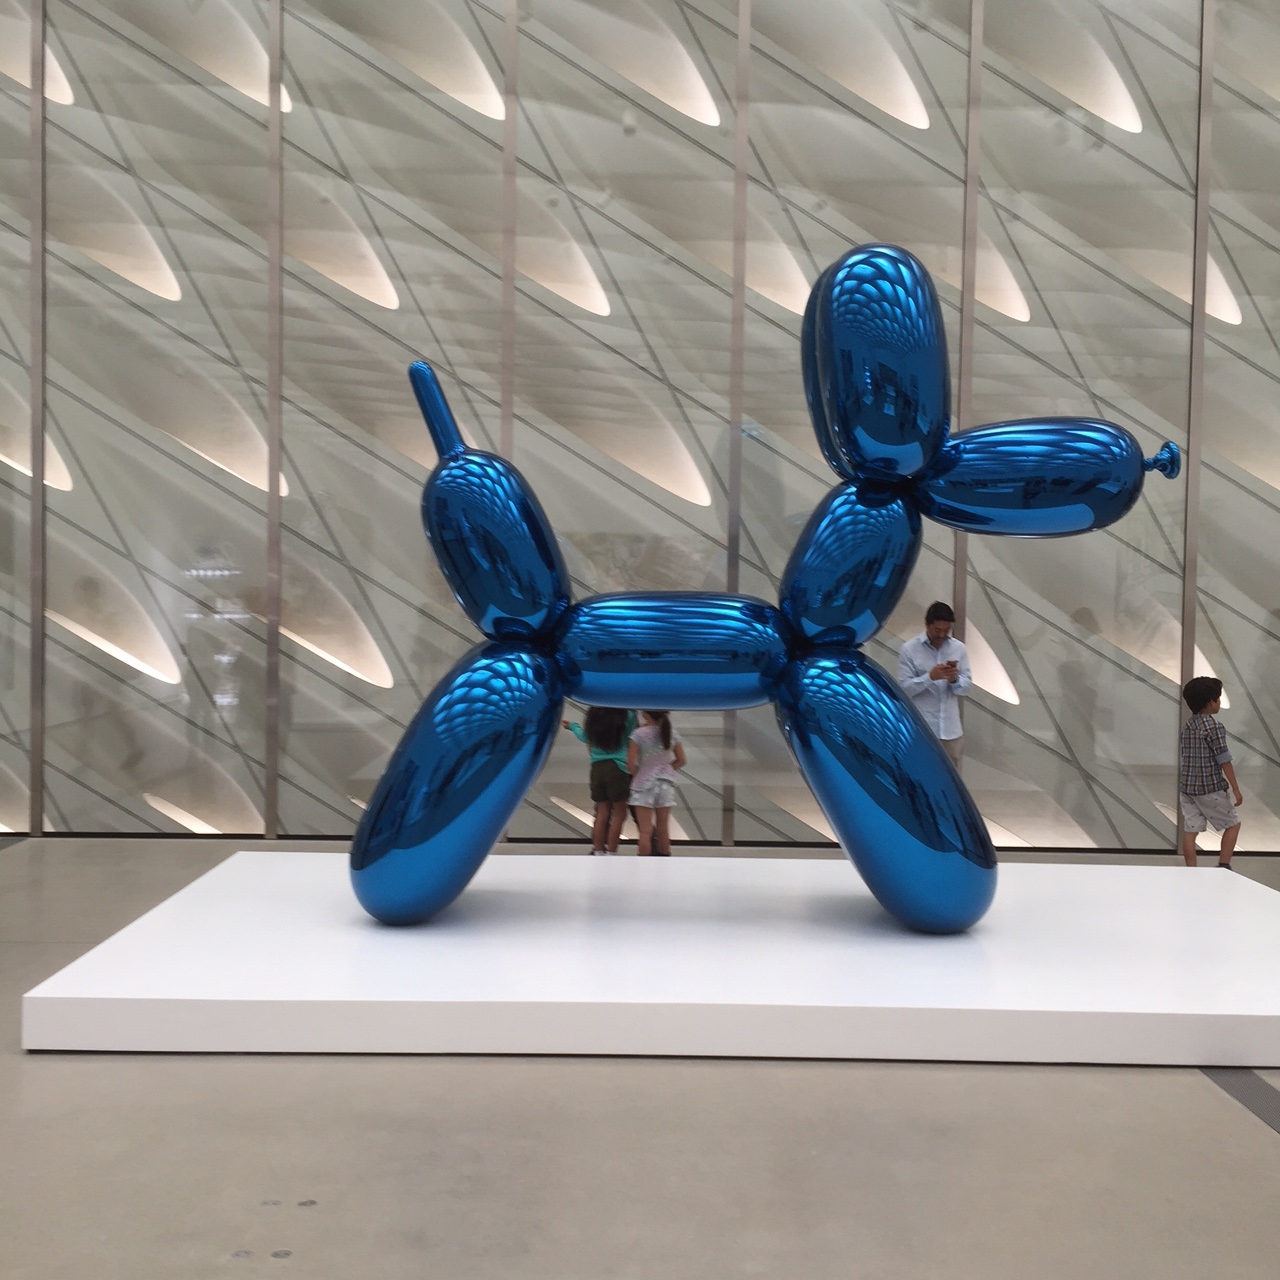 Jeff Koons at the Broad